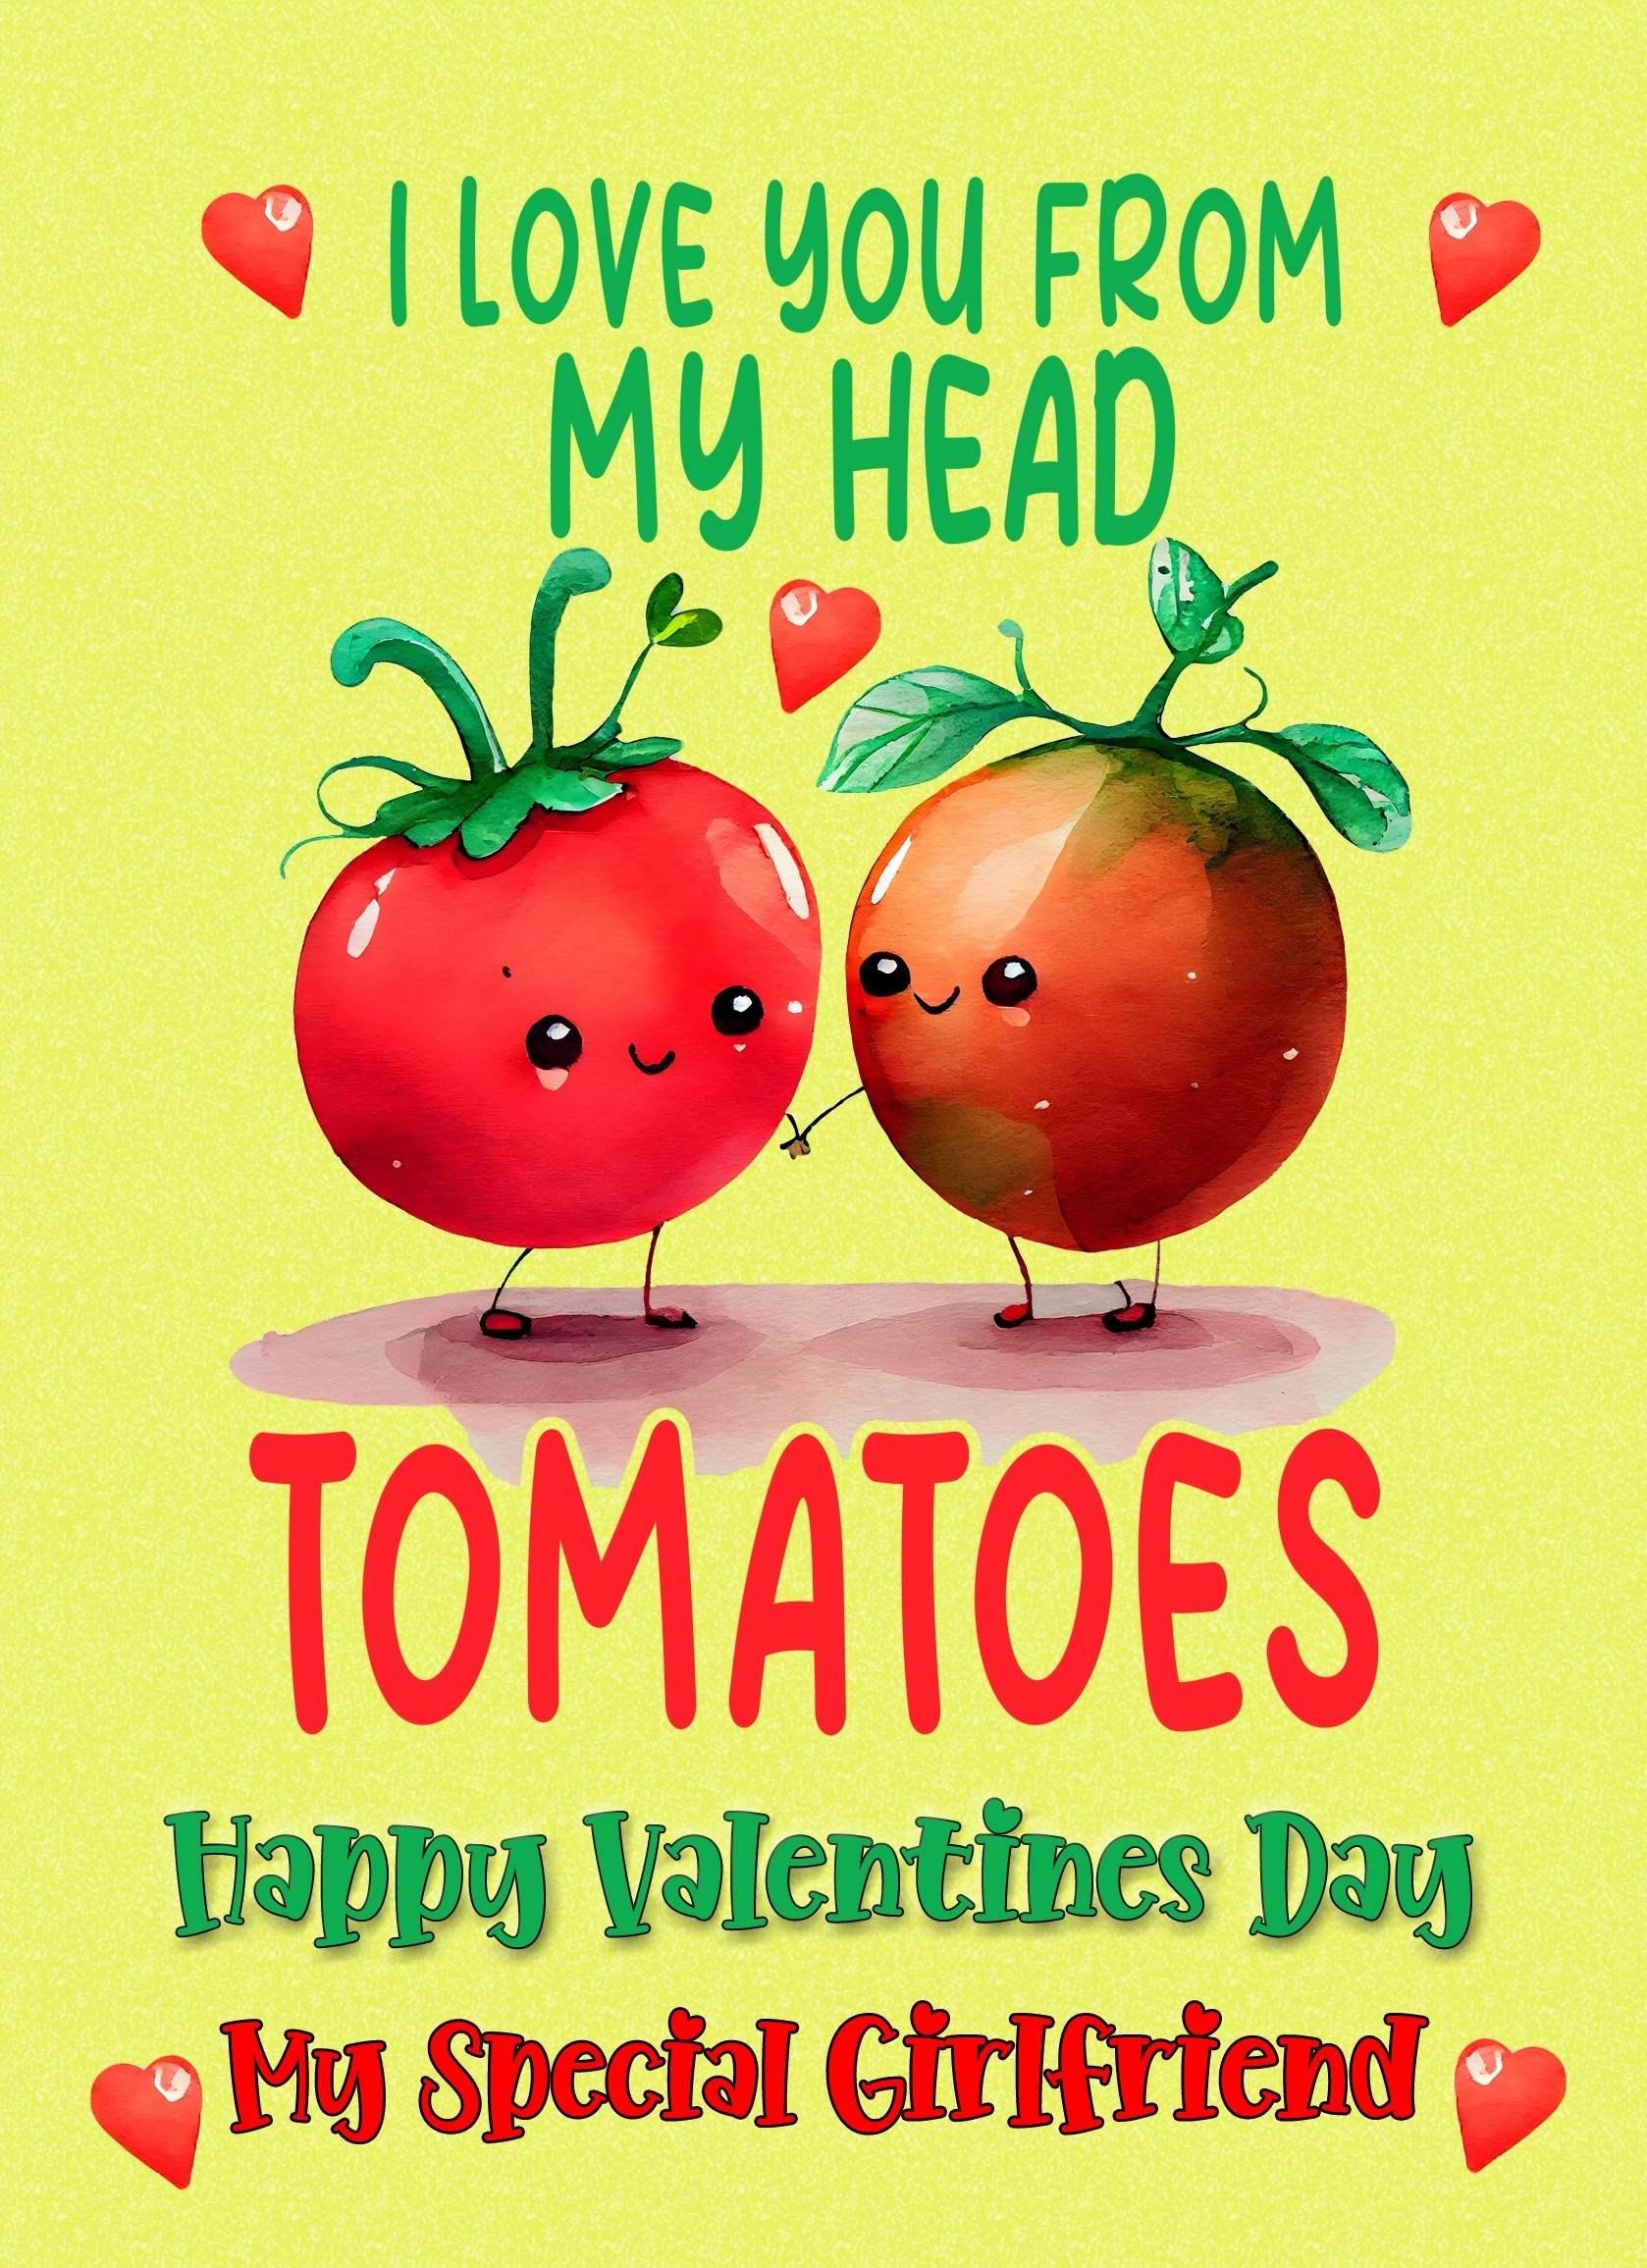 Funny Pun Valentines Day Card for Girlfriend (Tomatoes)